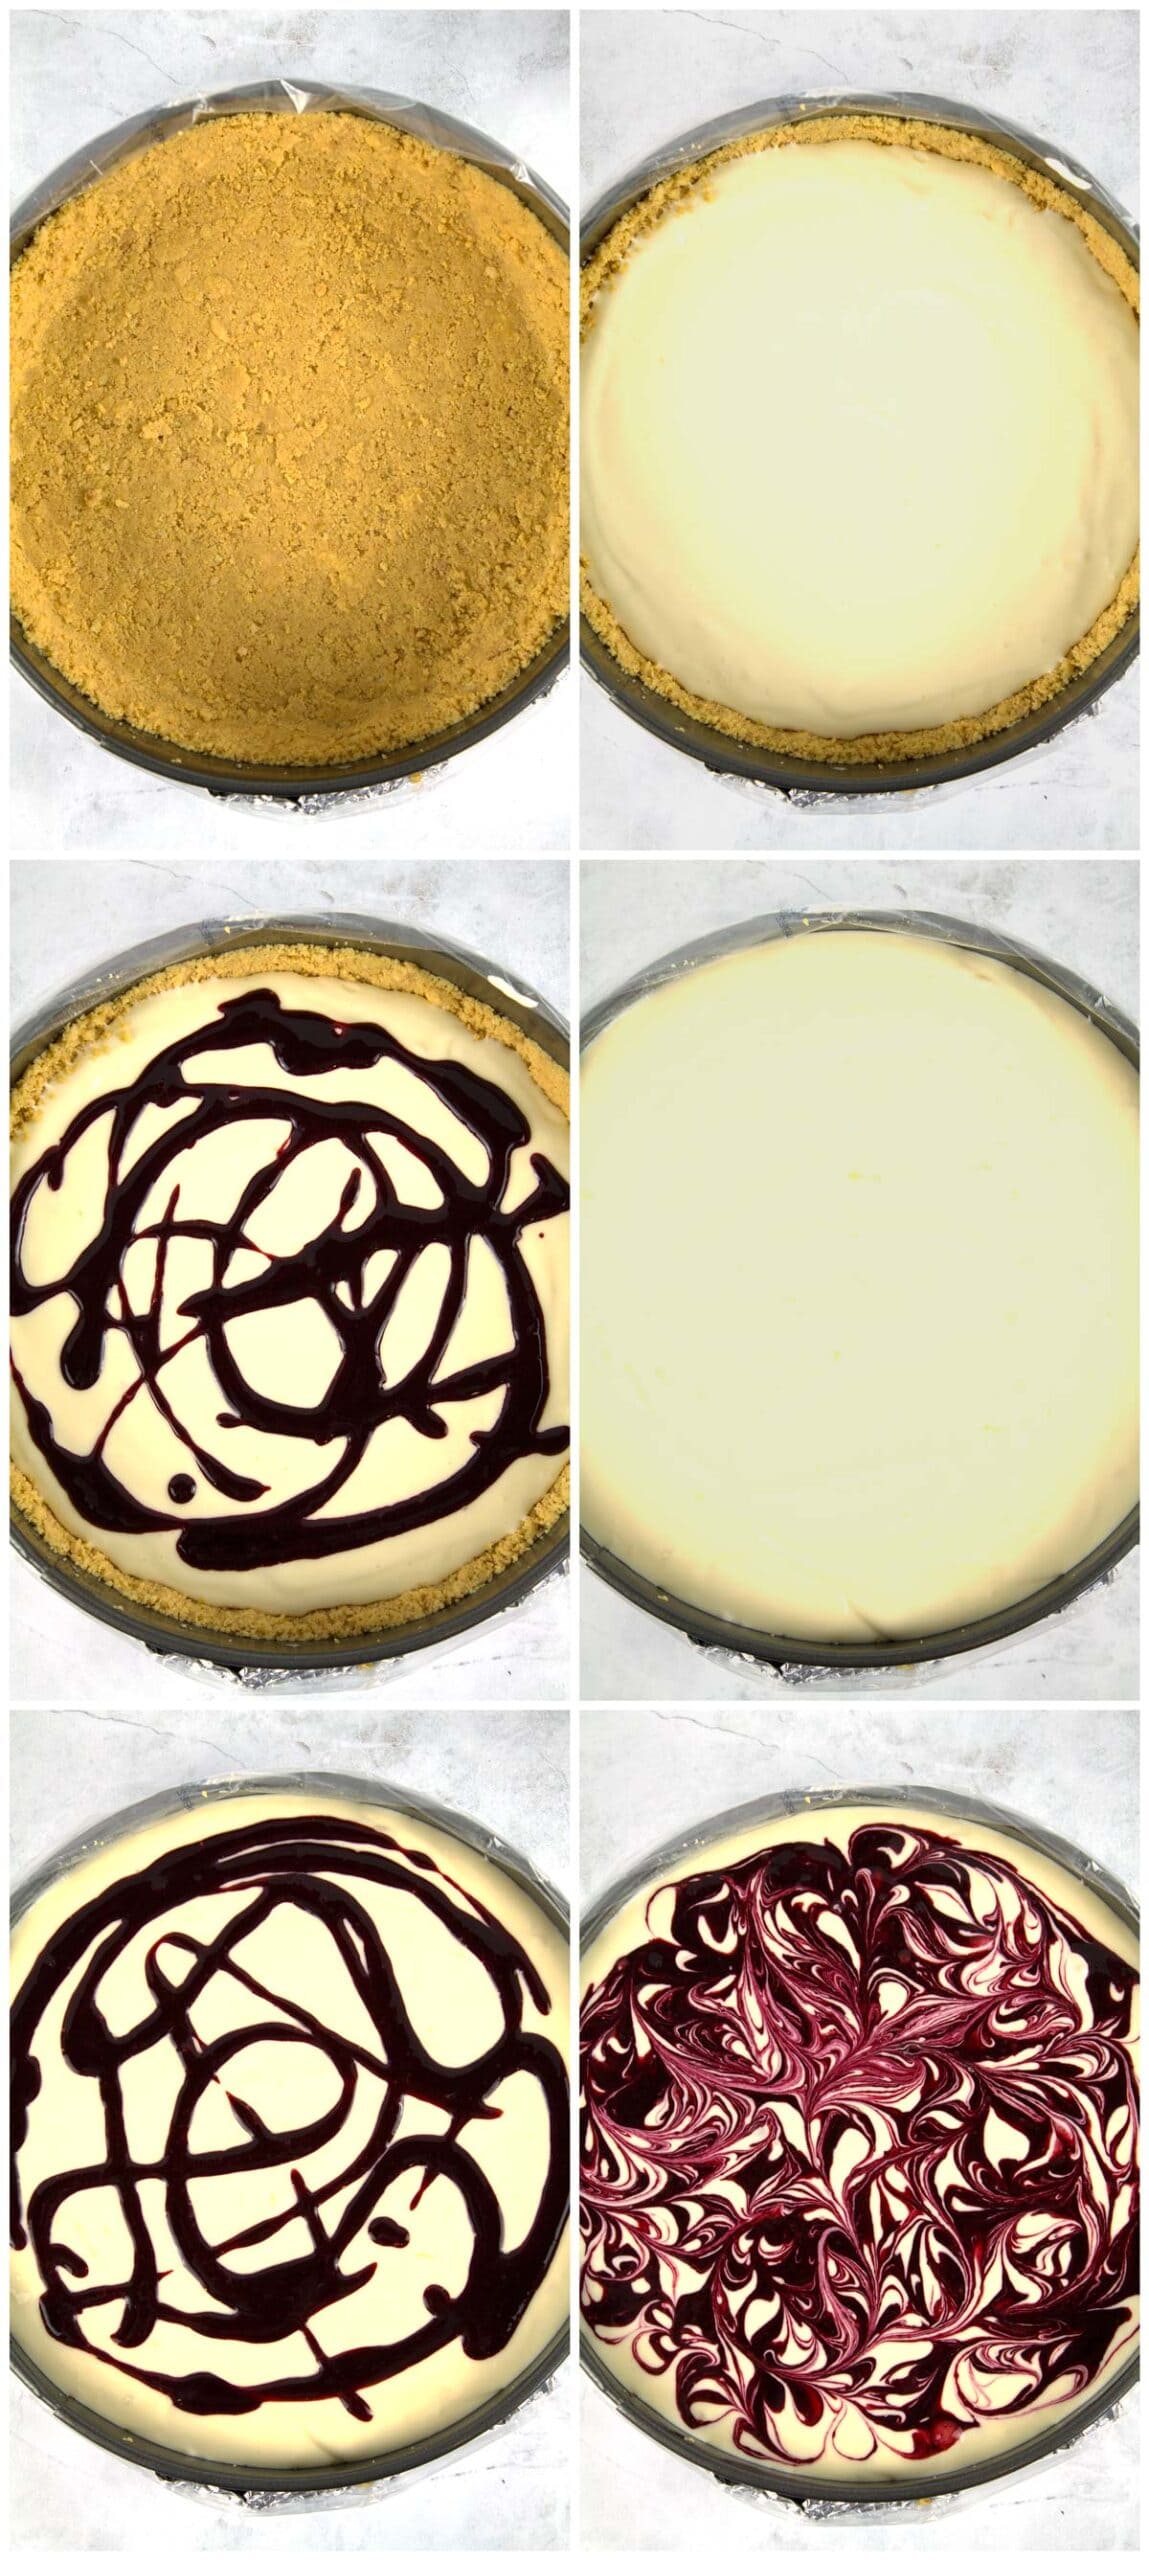 Cheesecake with blackberry sauce before and after swirling.